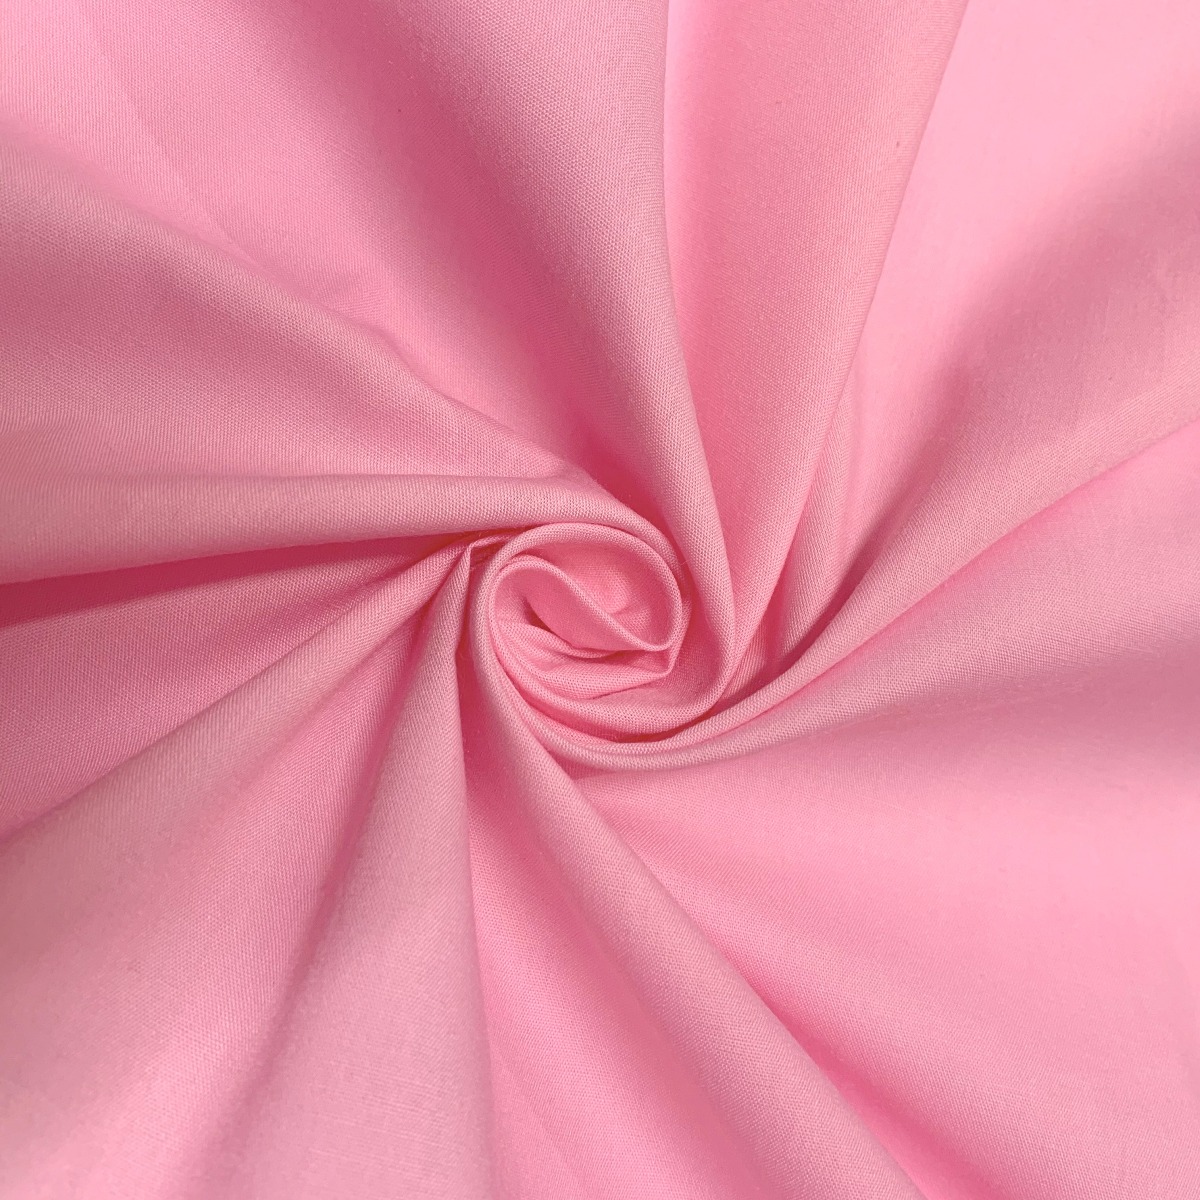 Superior Quality Plain Poly/Cotton Dress Fabric - Candy Pink